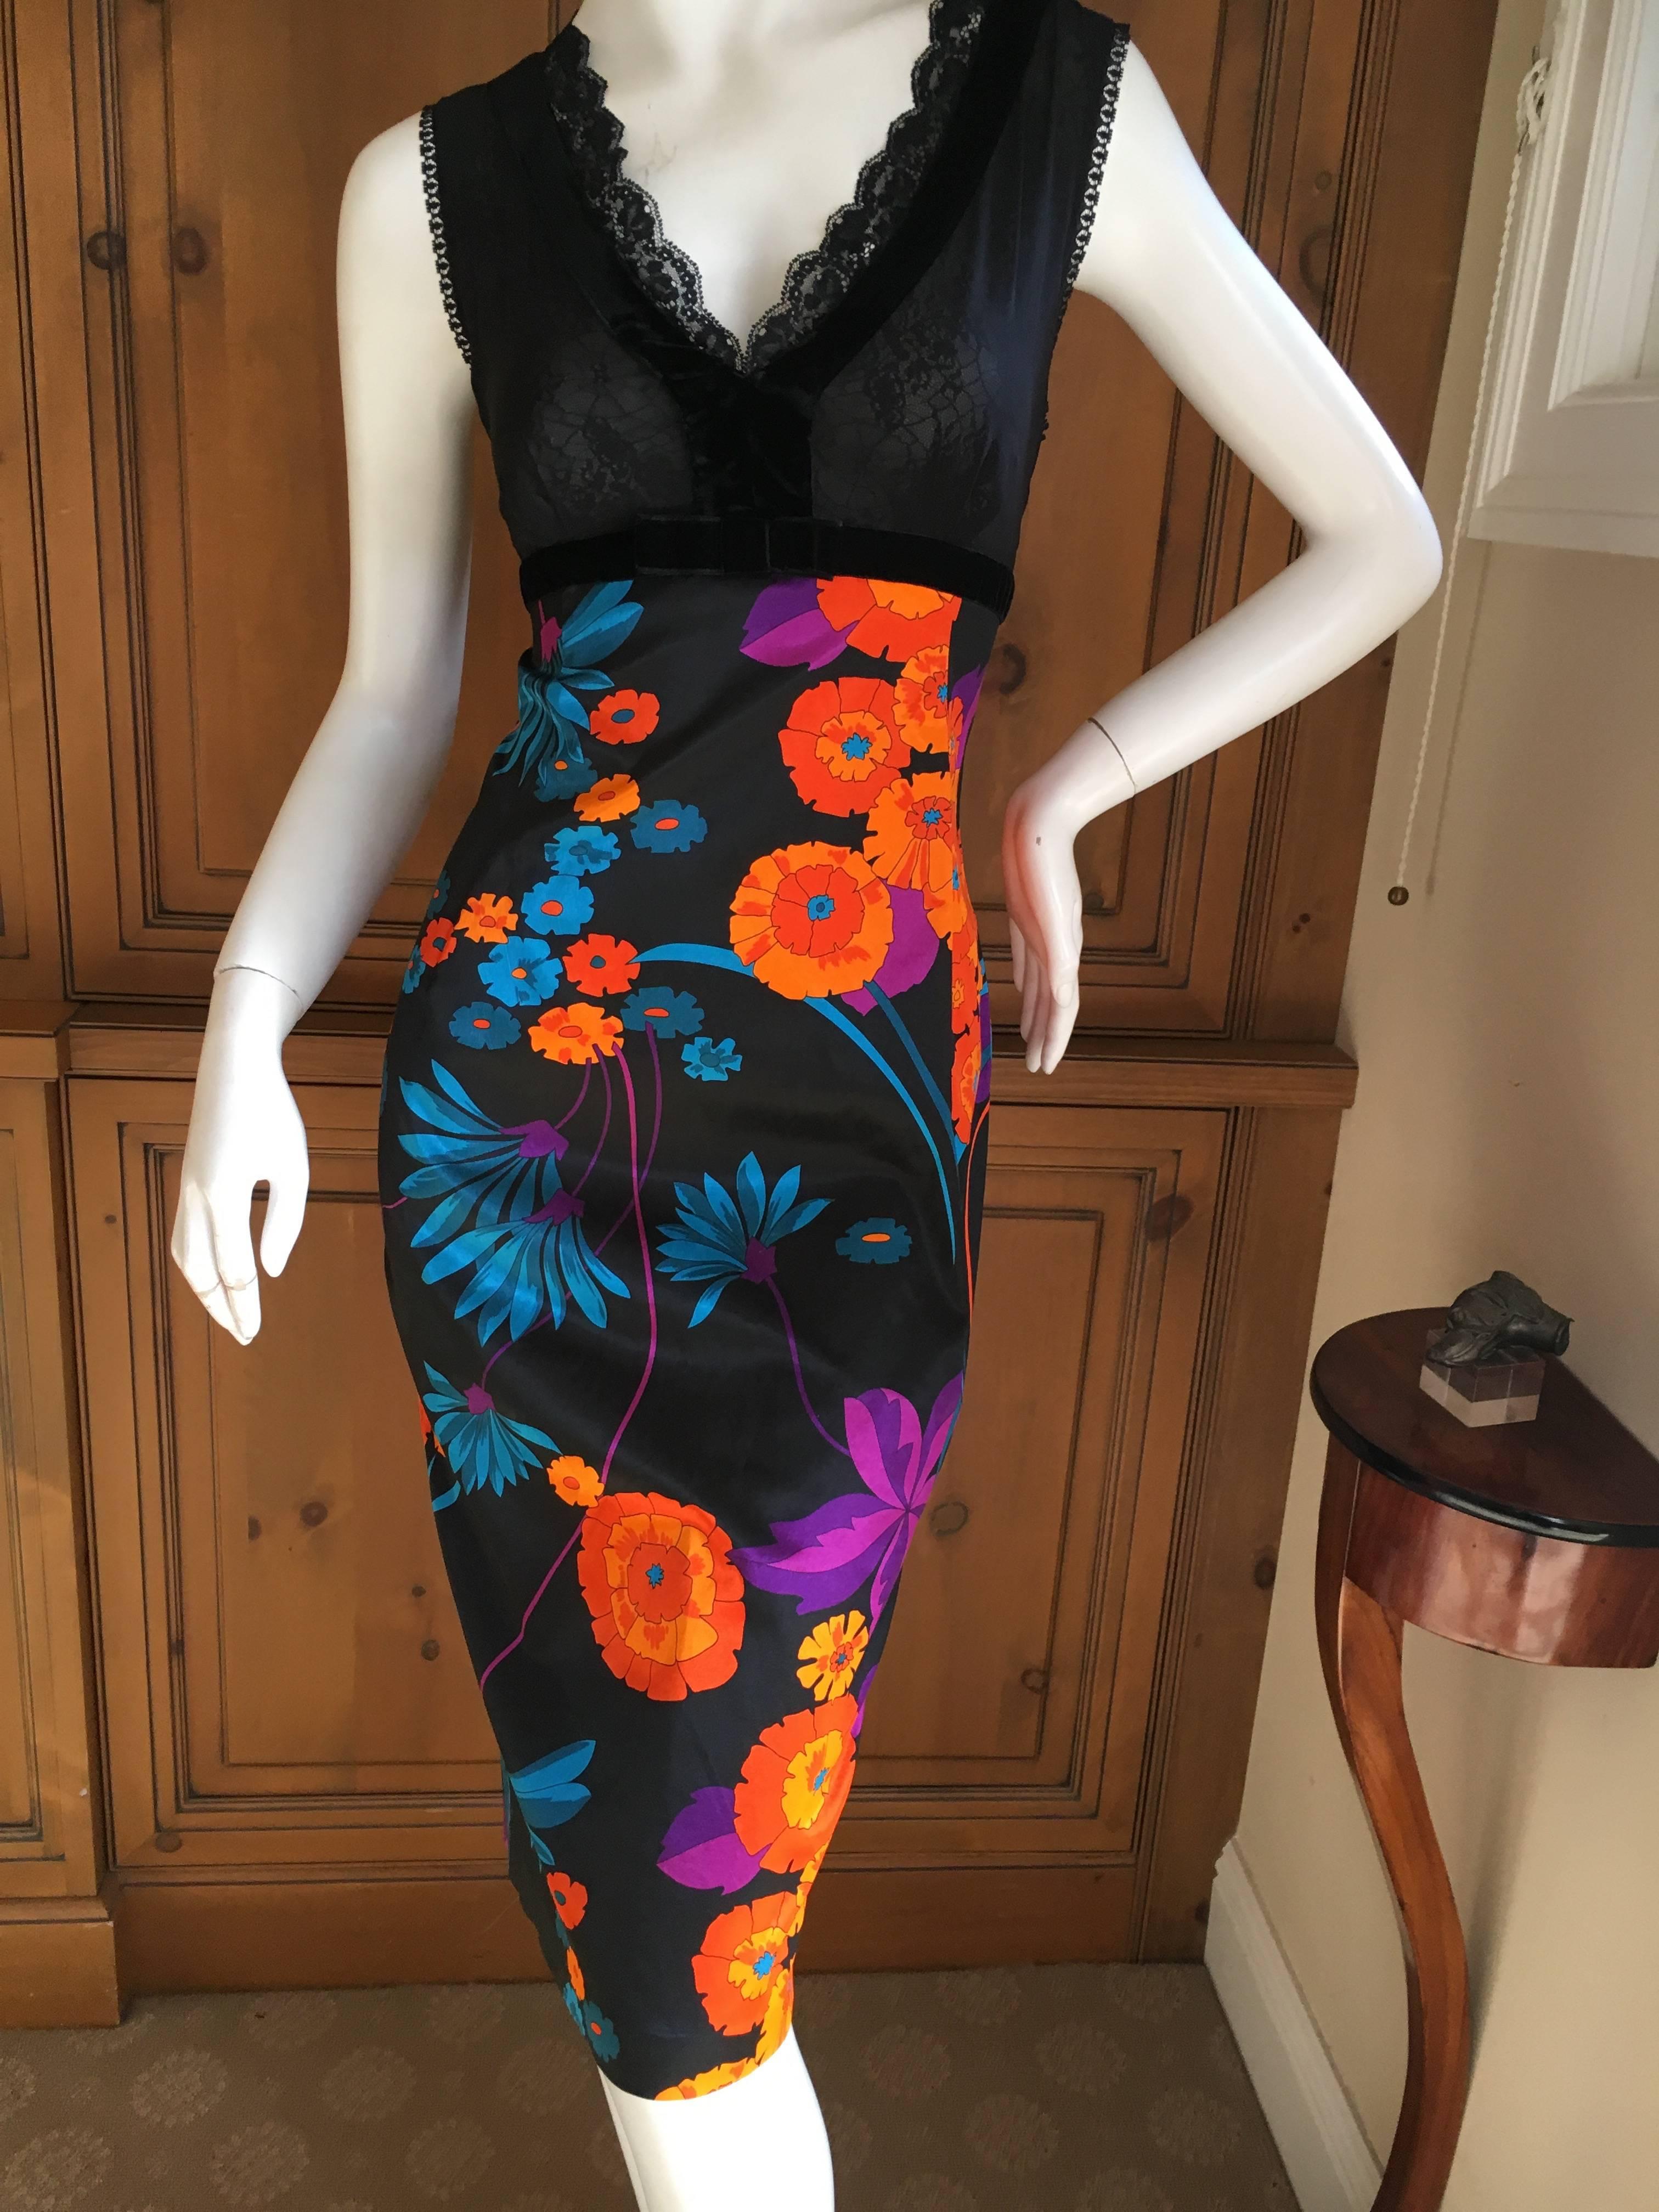 D&G Dolce & Gabbana Mod Print Cocktail Dress with Sheer Bust.
Please check measurements, size tag removed.
Bust 39'
Waist 30